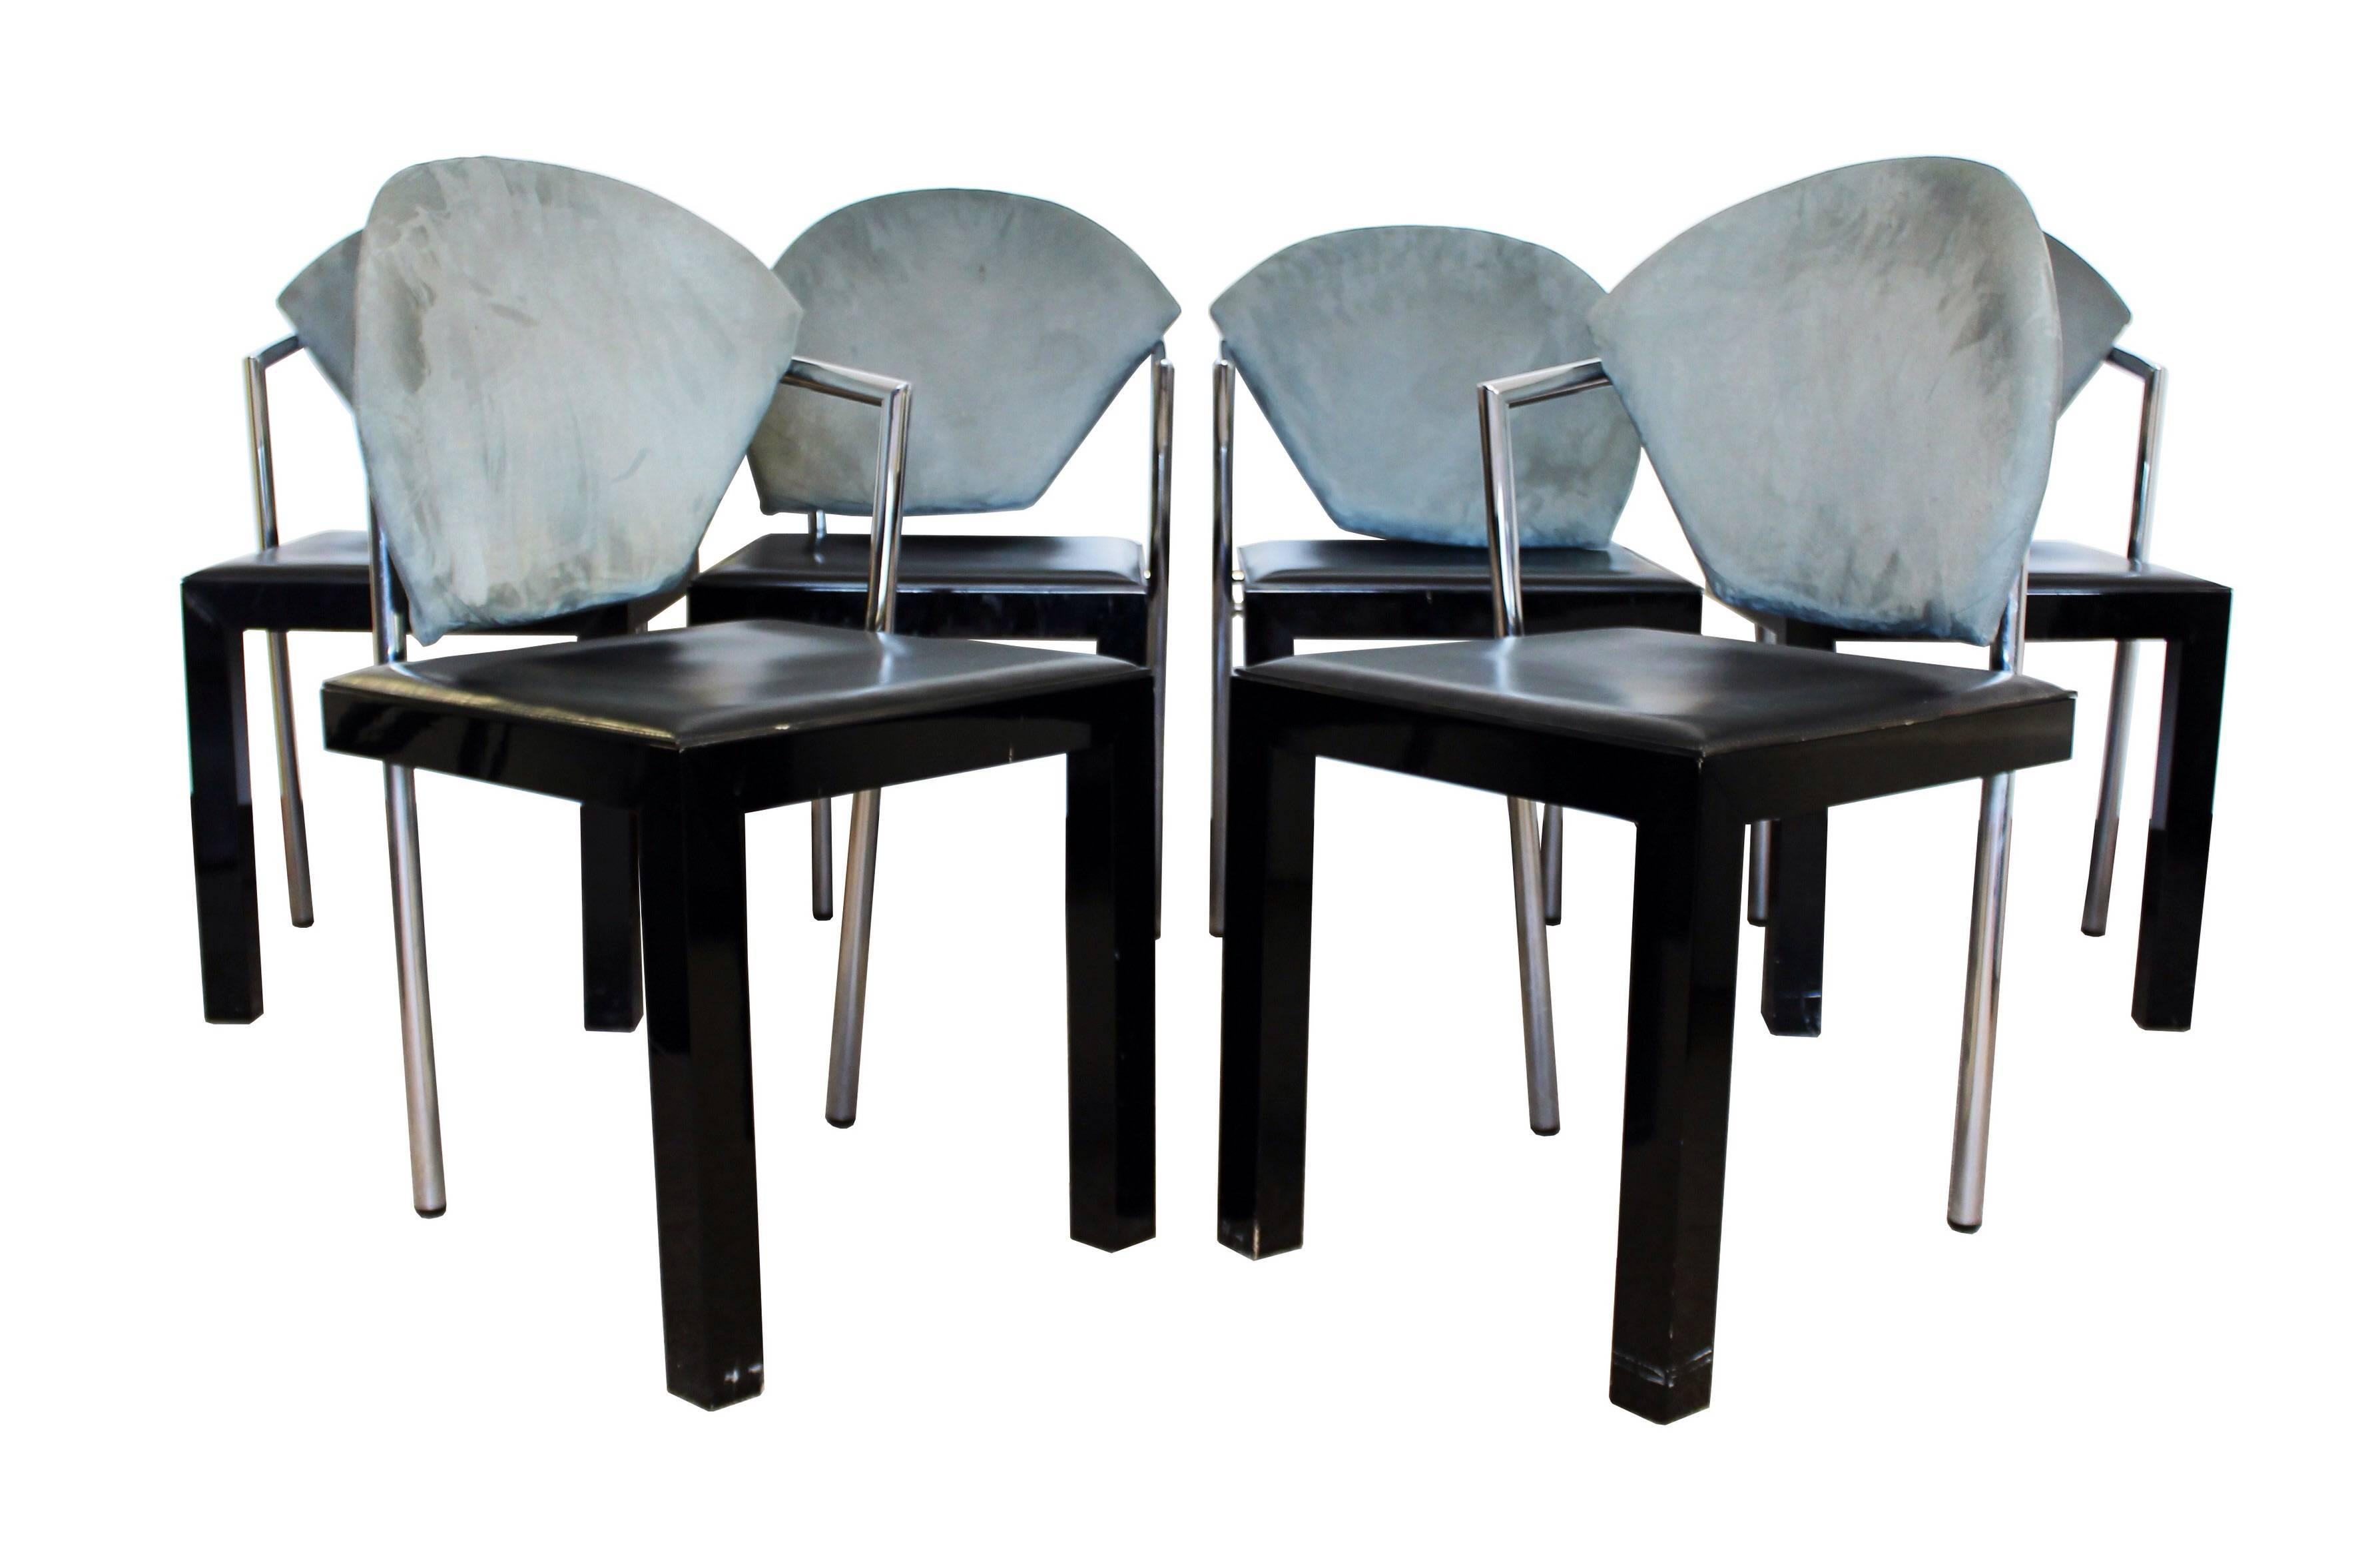 A unique and rare dining table and chairs designed by Giovanni Offredi for Saporiti Italia. The table is a beautiful high gloss lacquer oval wood top, with two architectural concrete inverted bases. Set of six Memphis style contemporary, chrome,